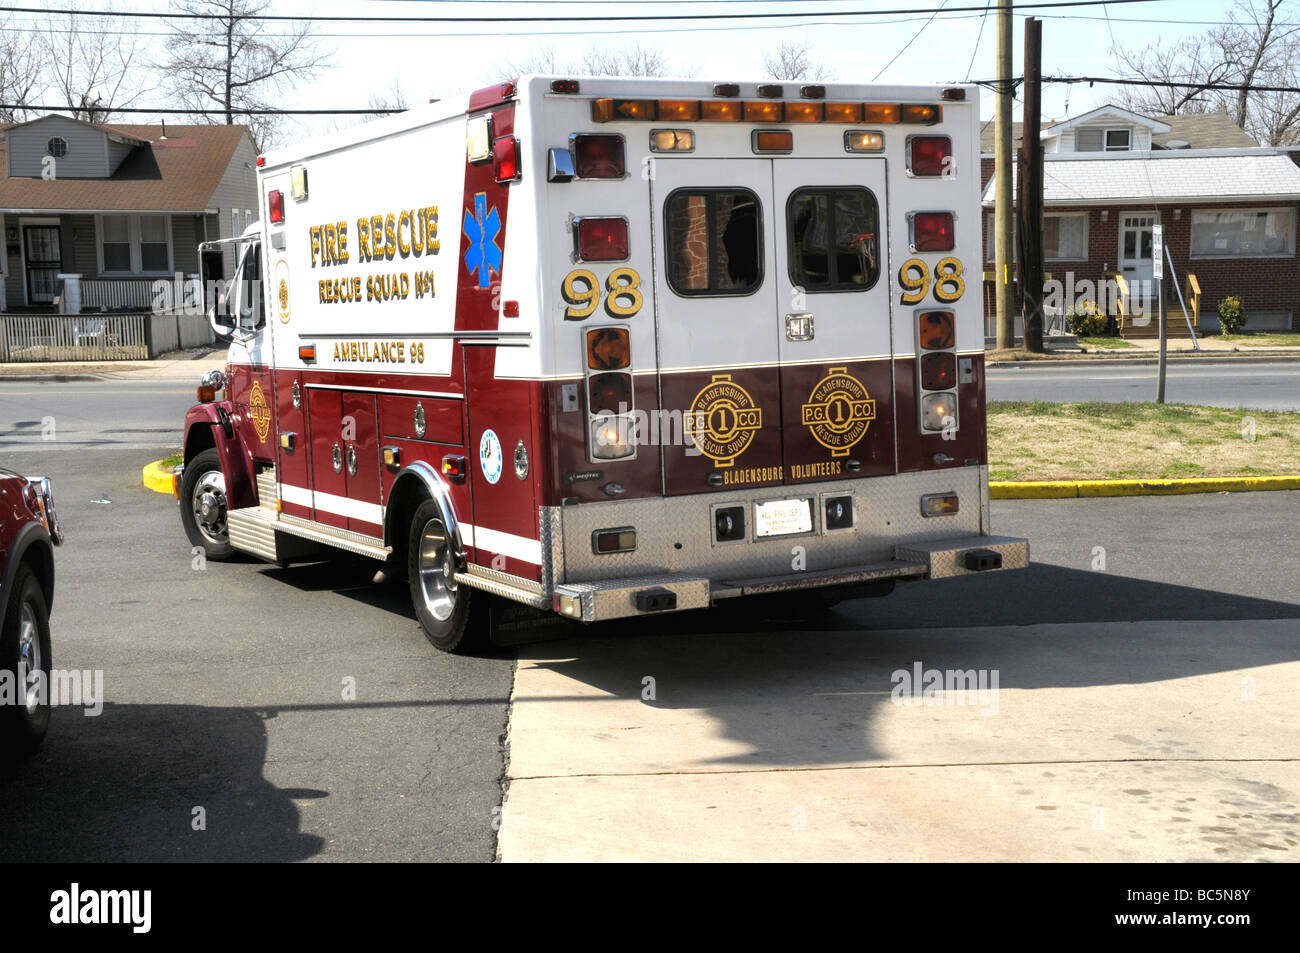 Ambulance responding to an emergency  911 call from their firehouse in Bladensburg, Maryland Stock Photo